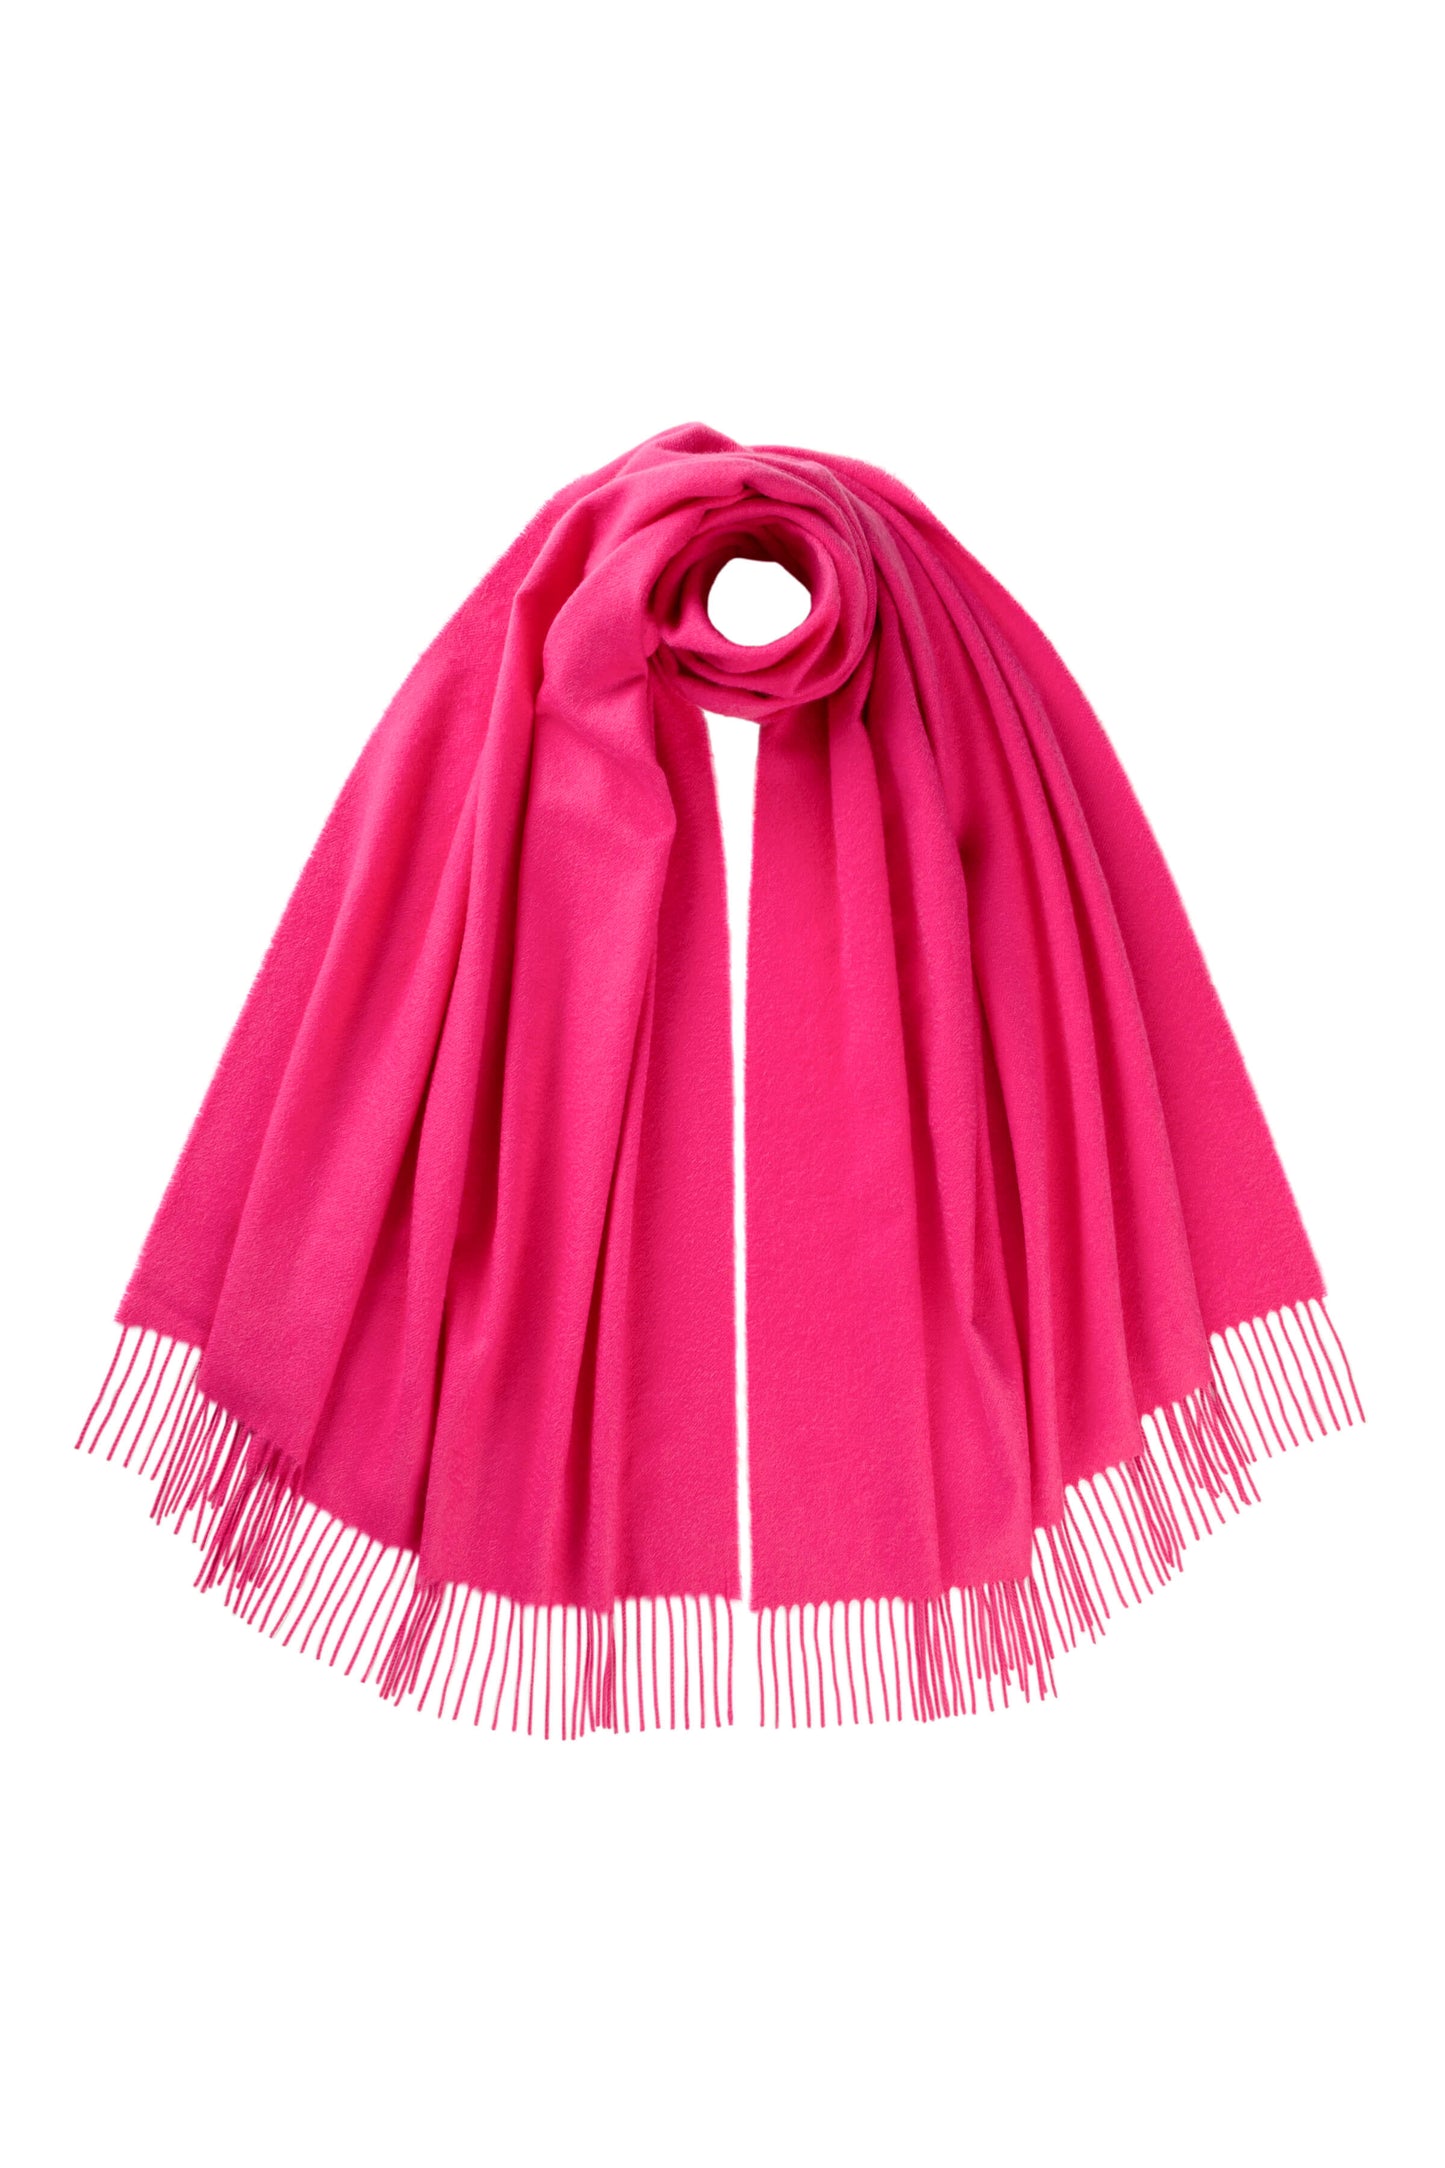 Johnstons of Elgin SS24 Accessories Fluro Pink Plain Cashmere Stole WA000056SE4982ONE